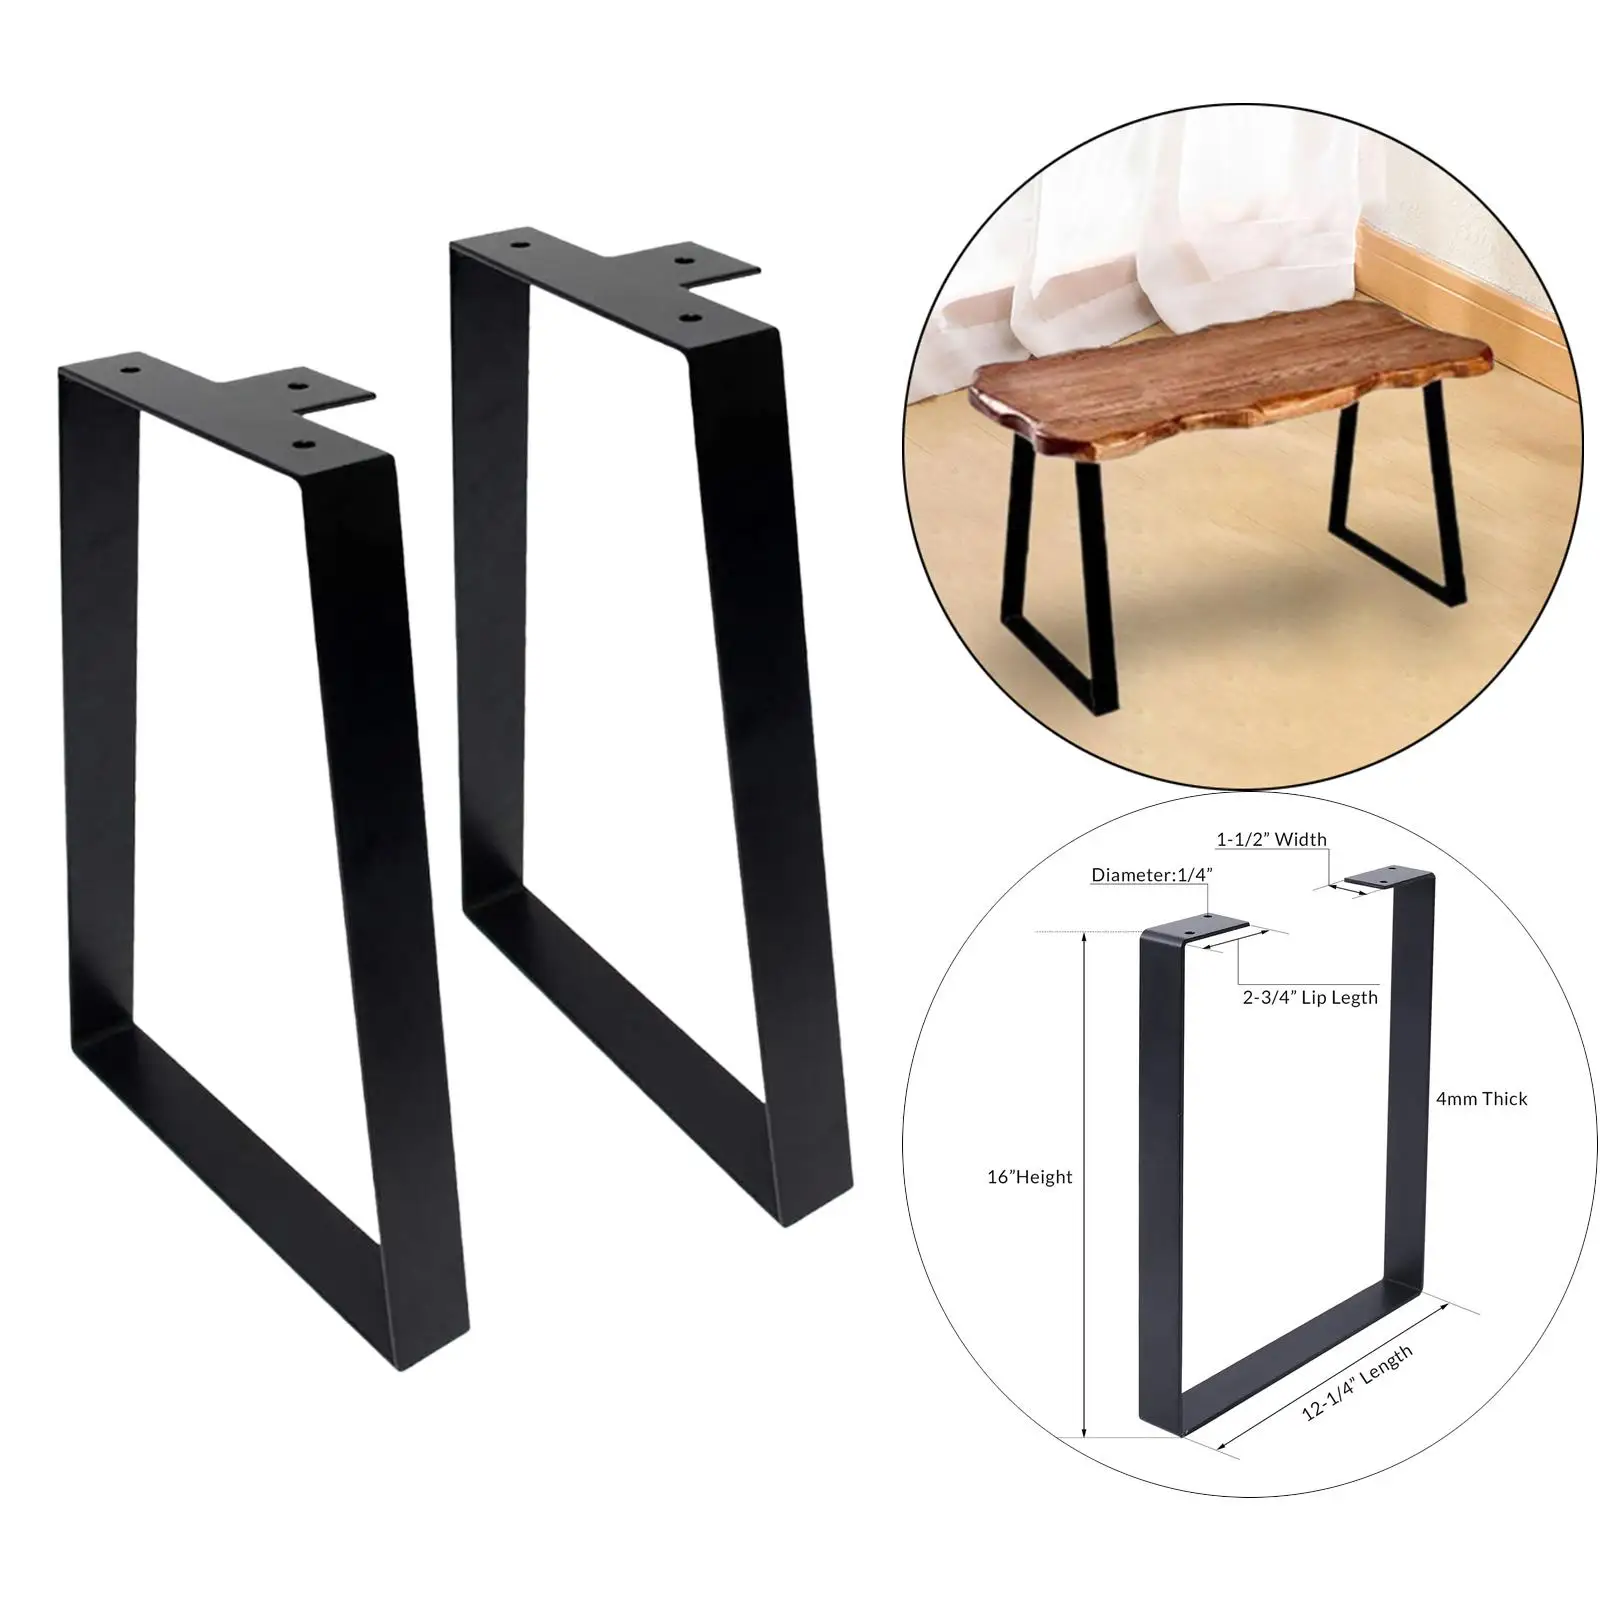 2Pcs Trapezoid Table Legs Furniture Legs Desk Legs DIY Home Modern Dining Table Legs for Coffee Tables Office Night Stands